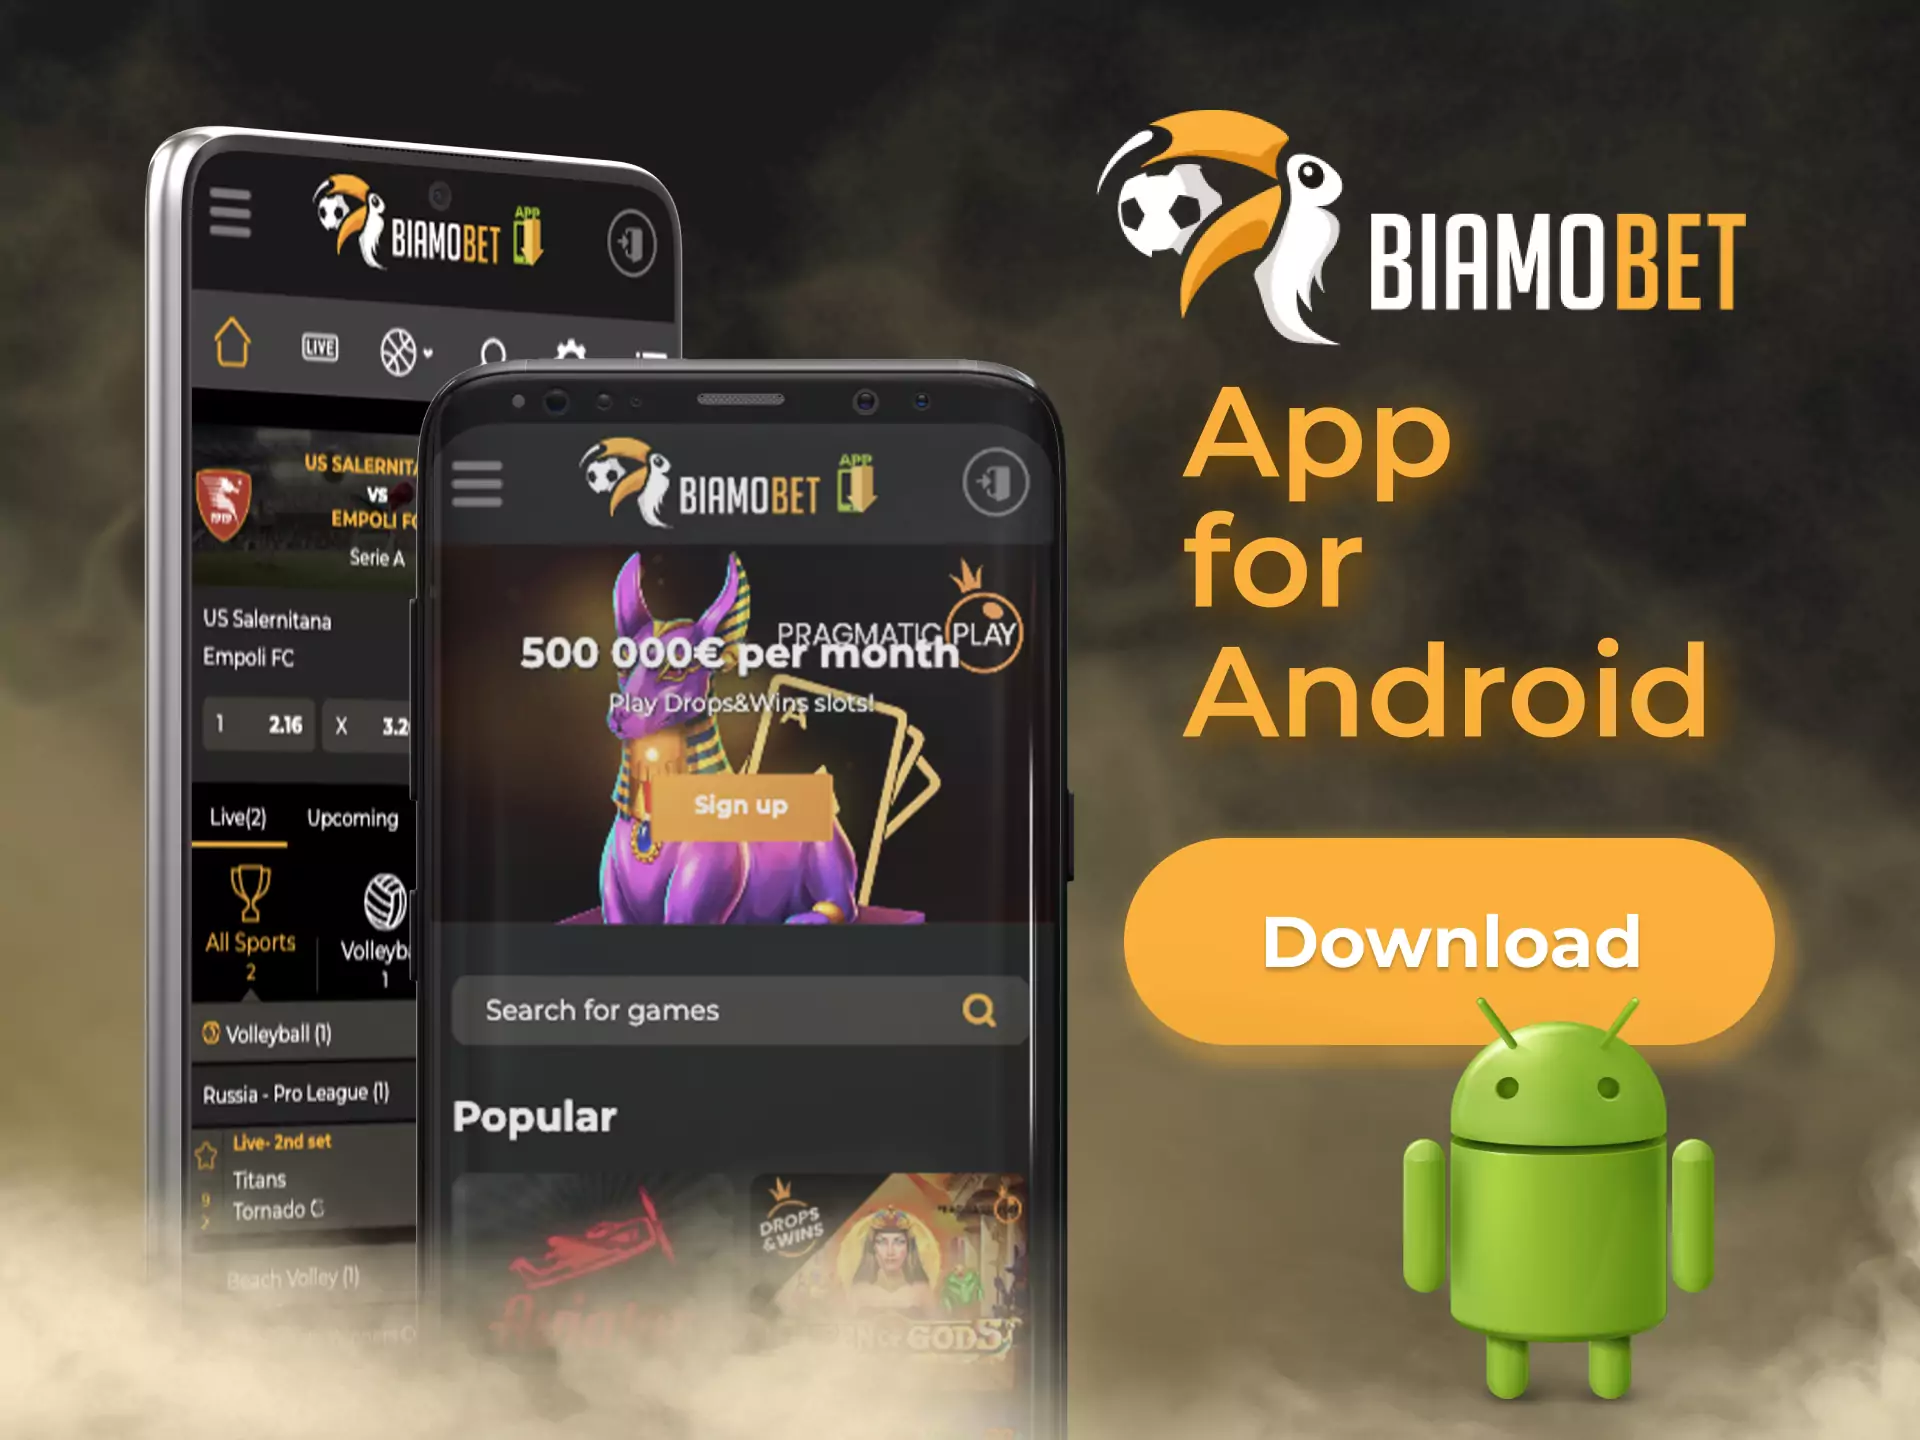 For Android devices, you can download the apk file right from the Biamobet official website.